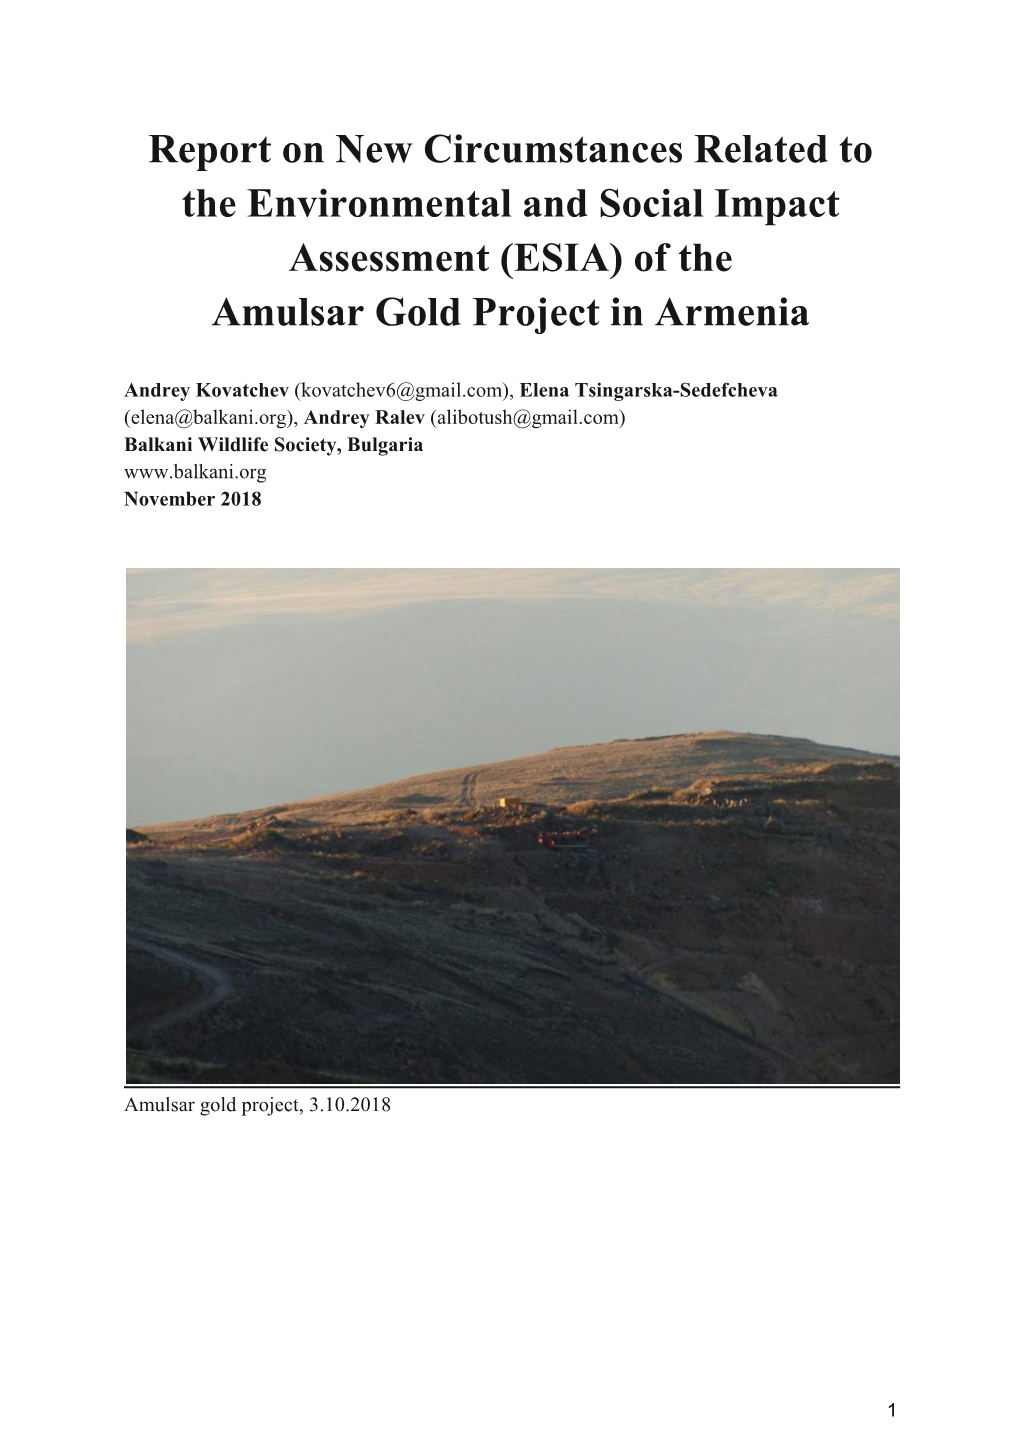 (ESIA) of the Amulsar Gold Project in Armenia